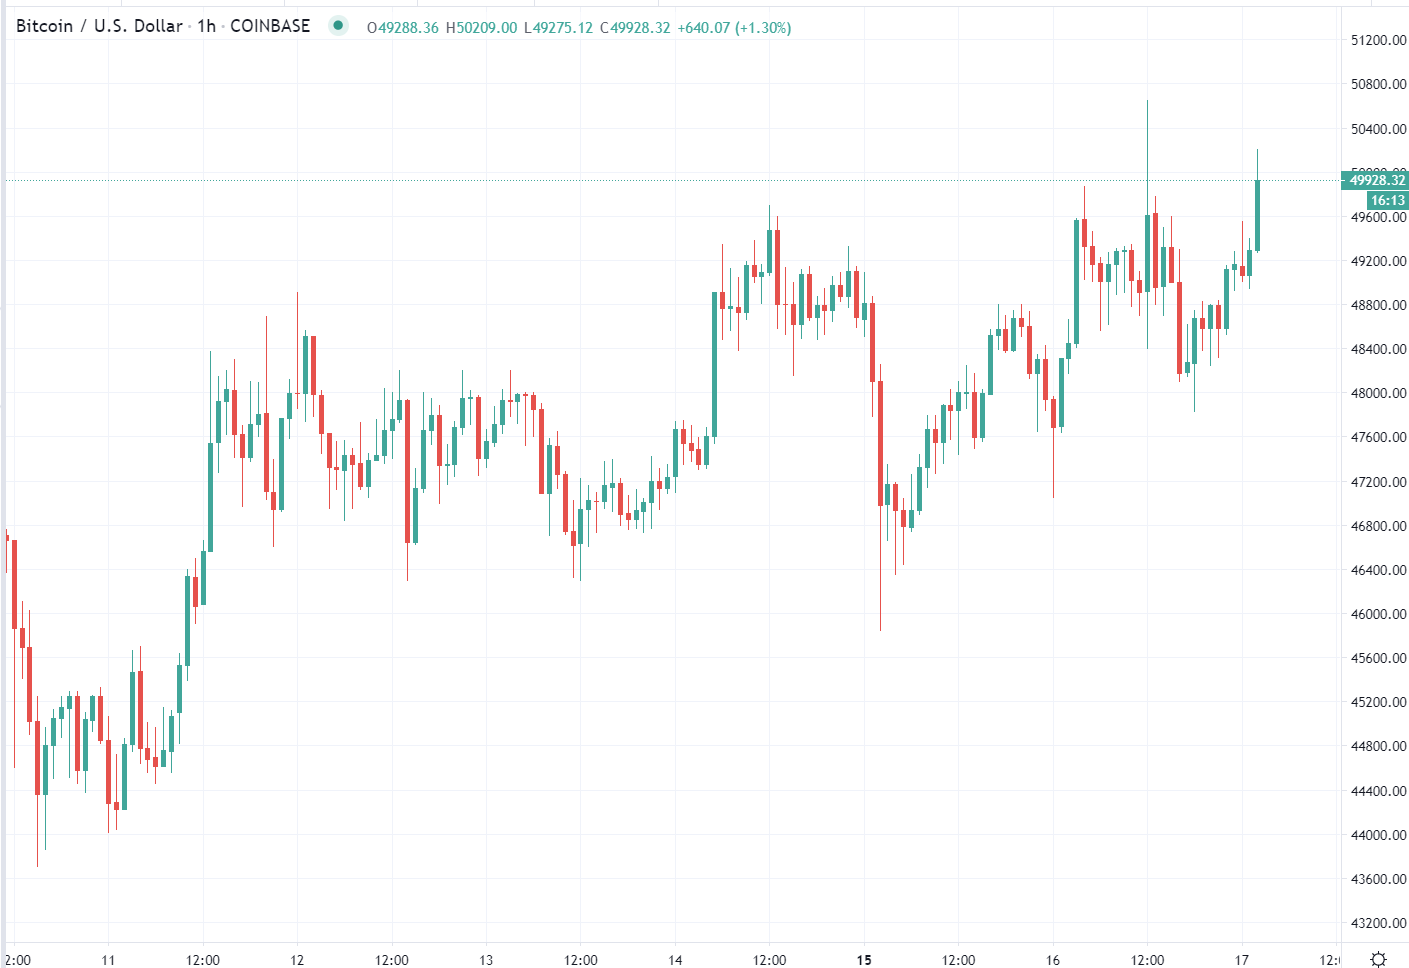 BTC had tested above the round number during US time and has done so again: